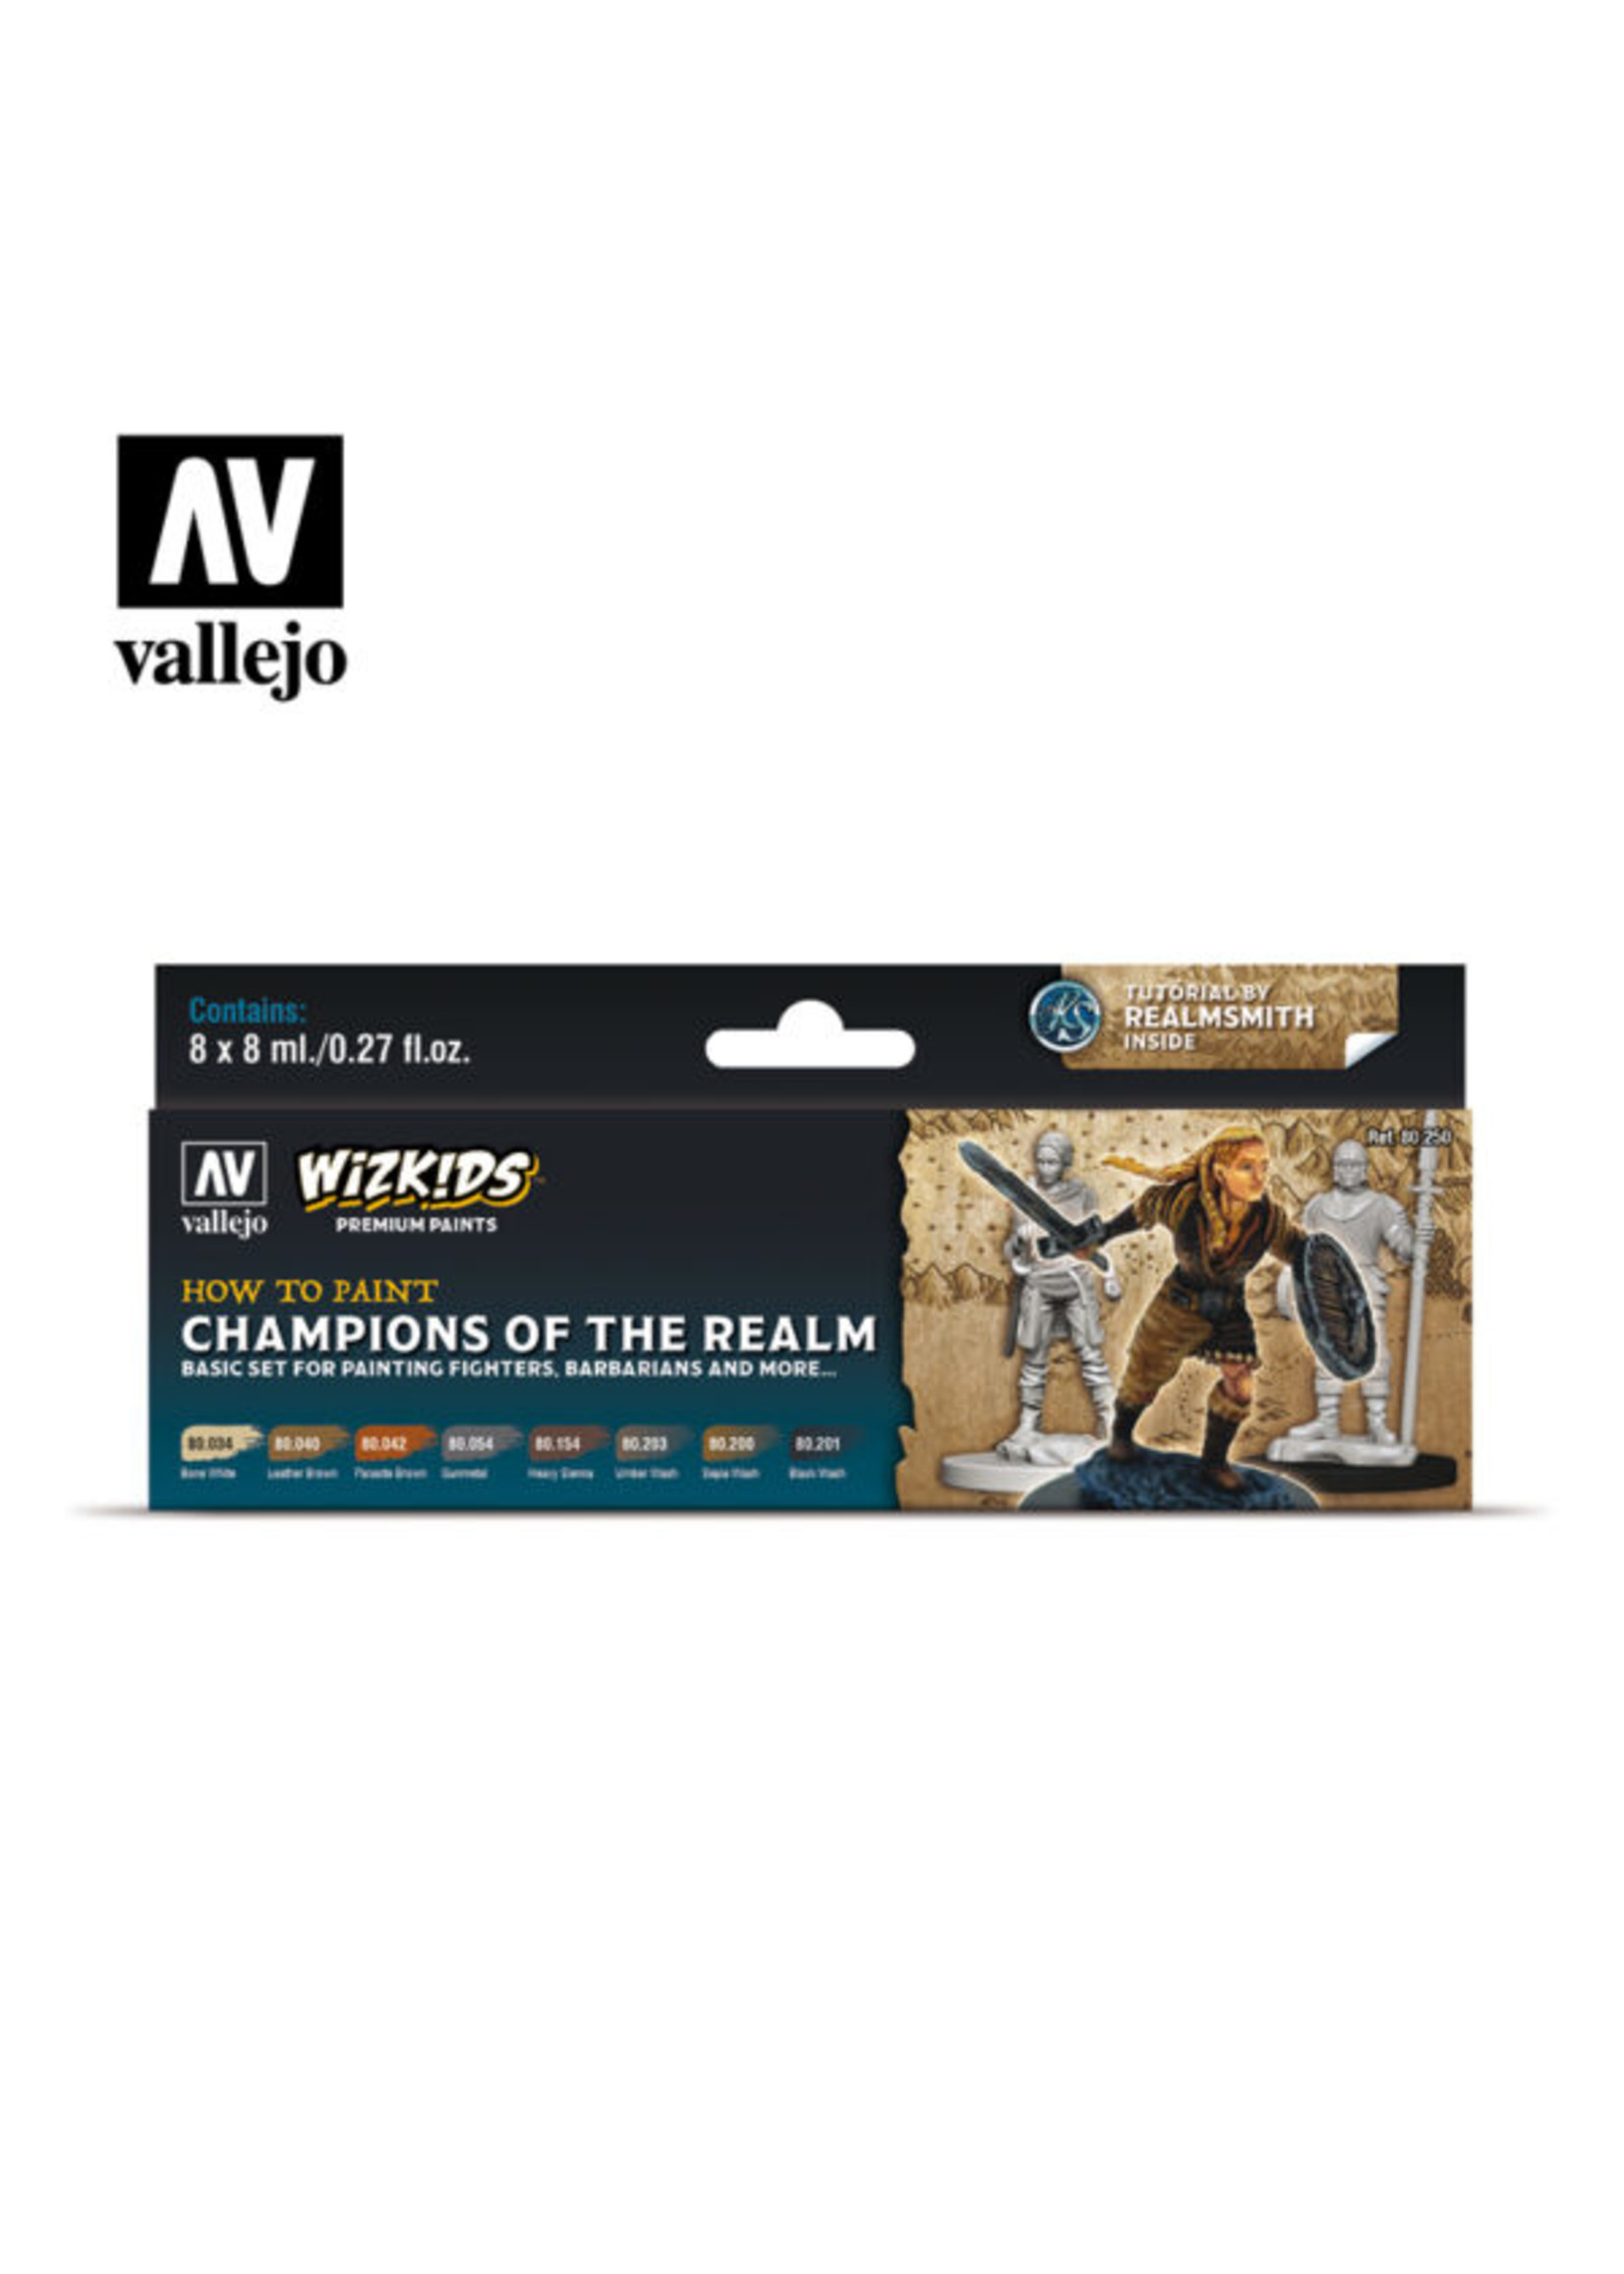 Vallejo Themed Paint Sets with Tutorials and Miniature